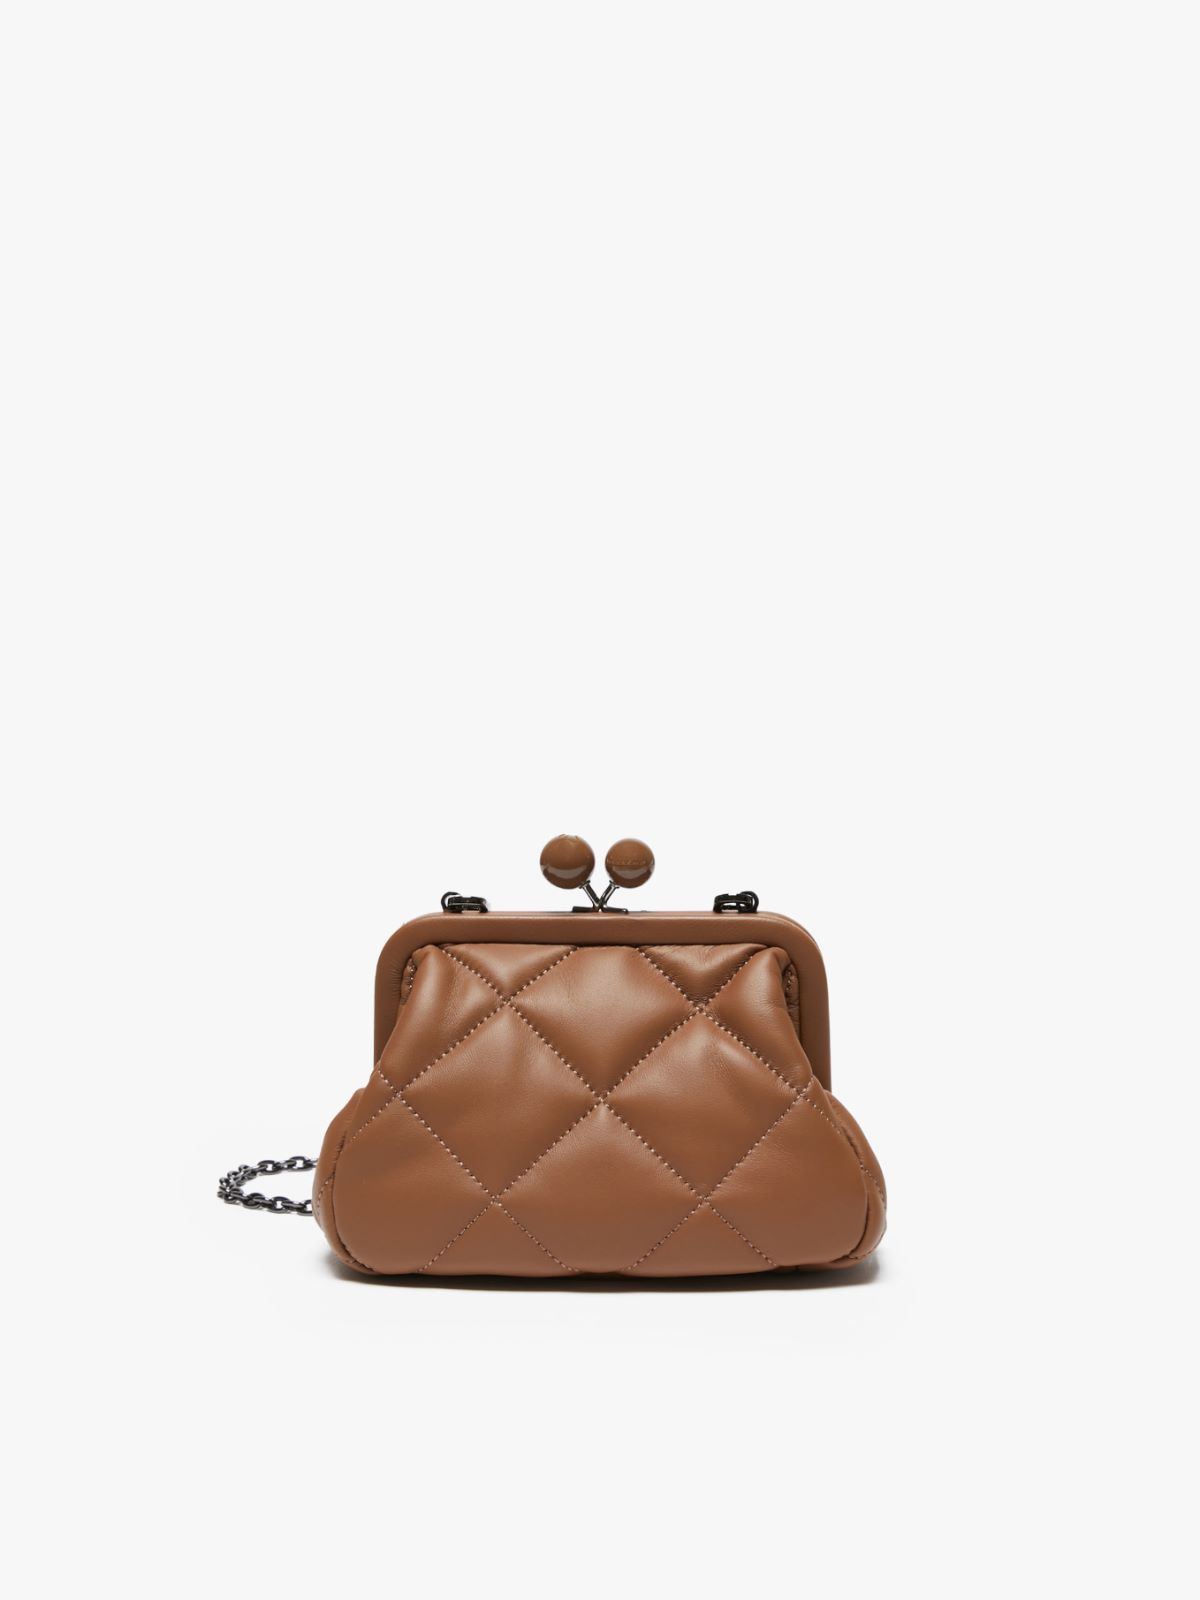 Small Pasticcino Bag in nappa leather - BROWN - Weekend Max Mara